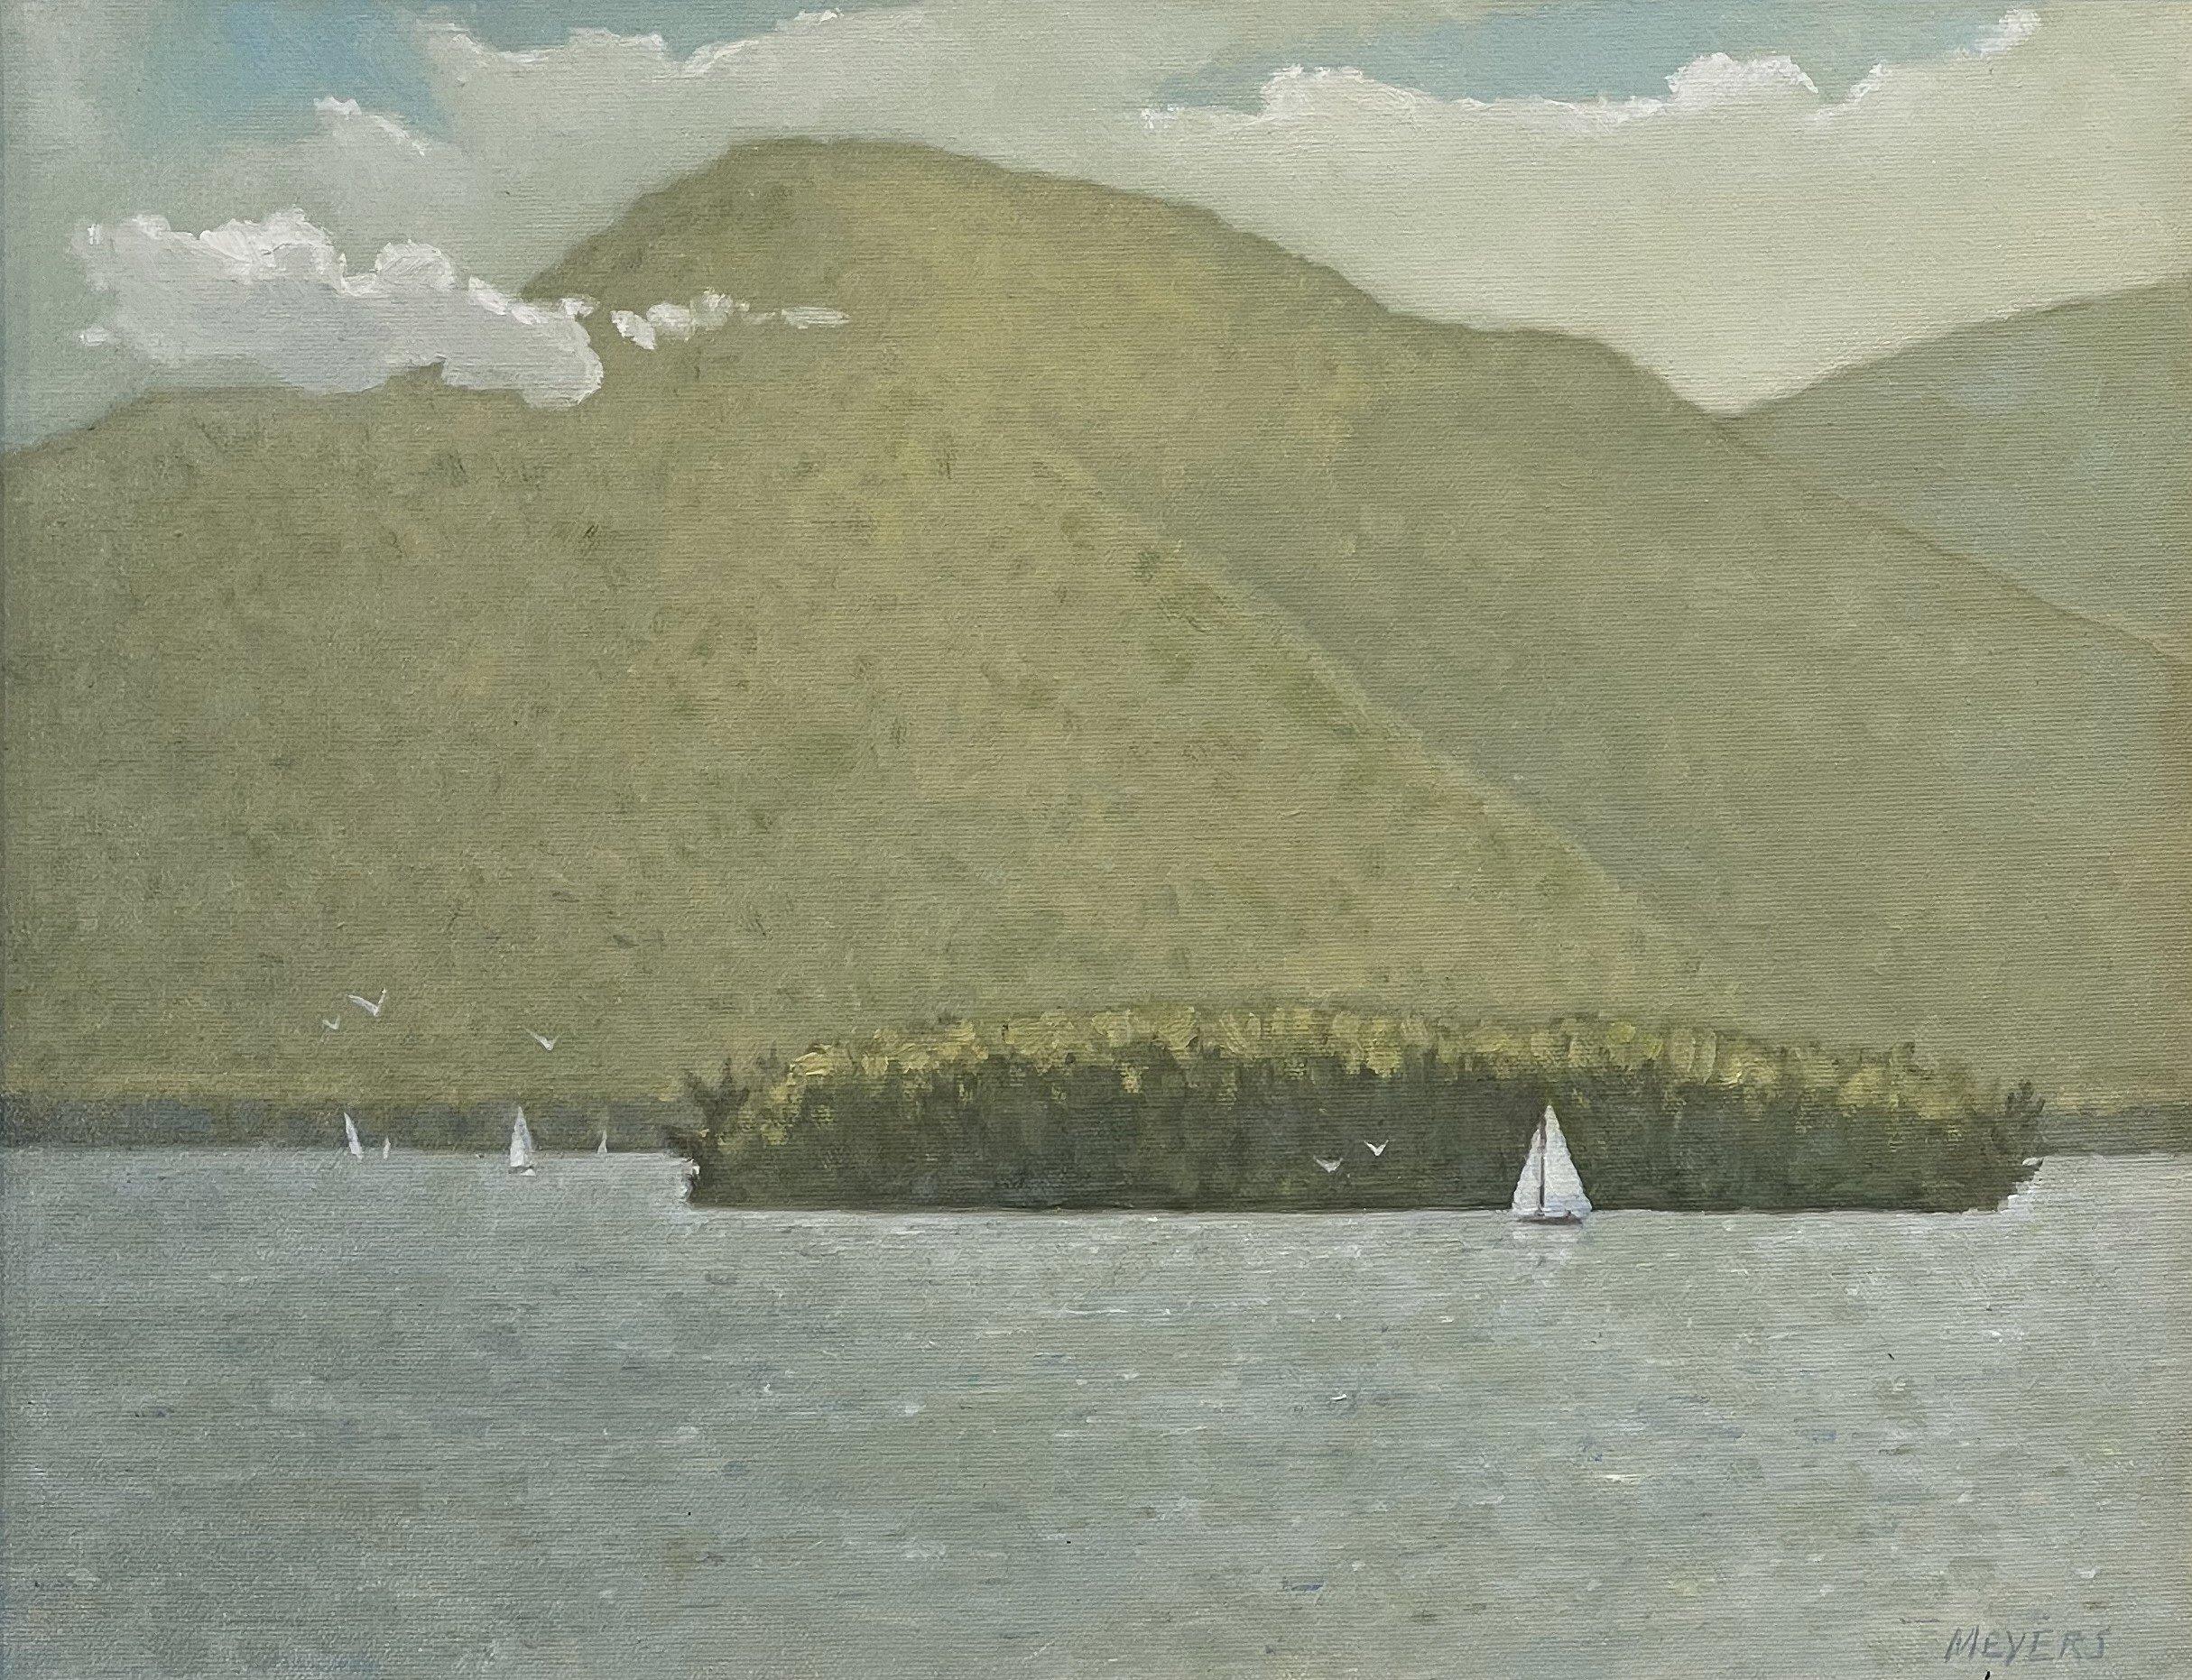 "Lifting Clouds, Bolton" is a 14x18 oil painting on canvas by artist Rob Meyers featuring a mountainous view from out on the water. A moody sky with lifting clouds reveals blue skies with sail boats gliding across the smooth waters below. Subtle